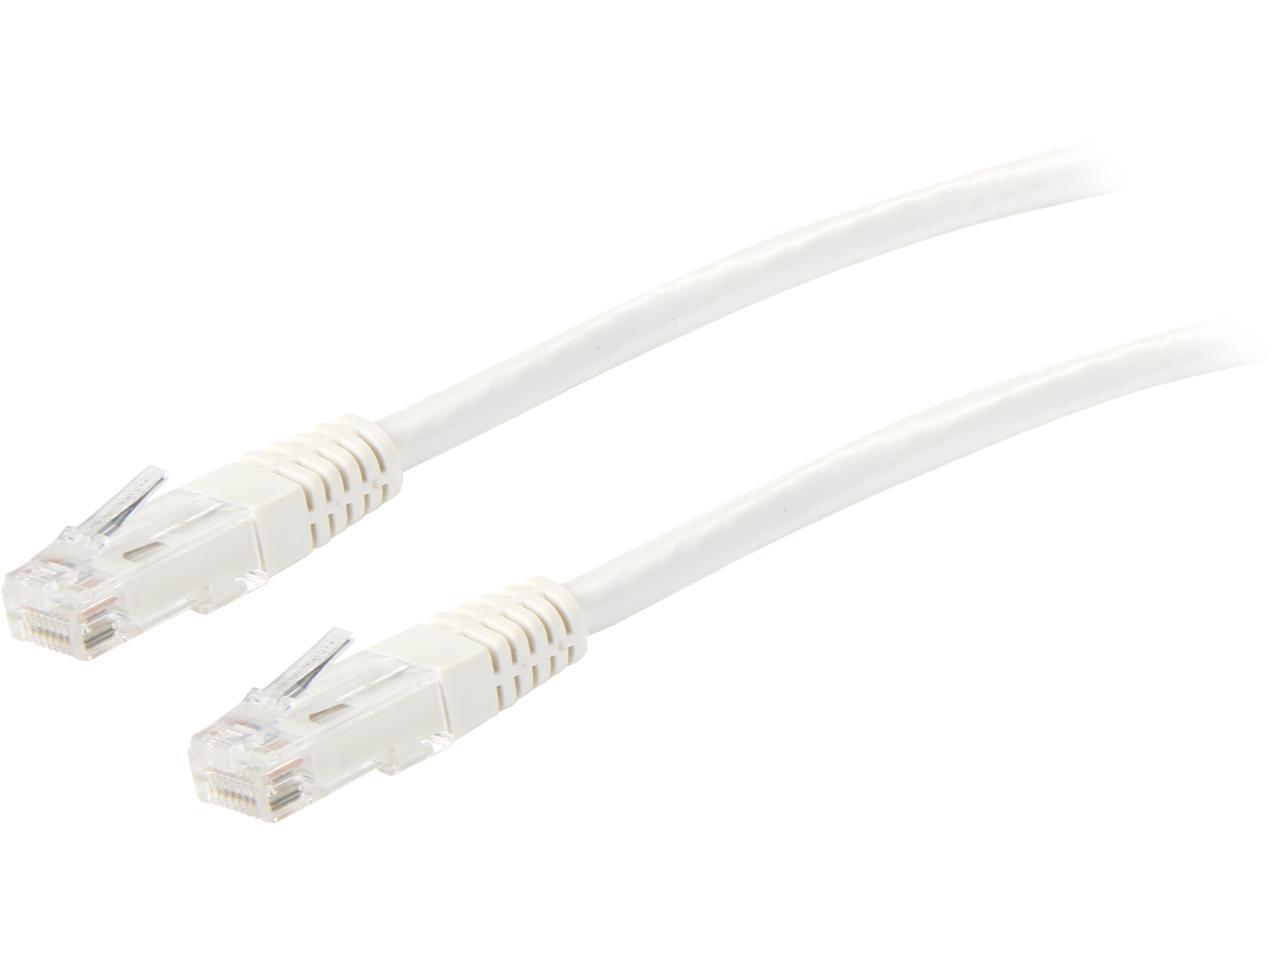 8Ft 8Ft Cat6 Non Category 6 For Network Device Rj Booted Unshielded 45 Male White Product Type: Hardware Connectivity/Connector Cables Utp White 45 Male Rj Network Patch Cable 